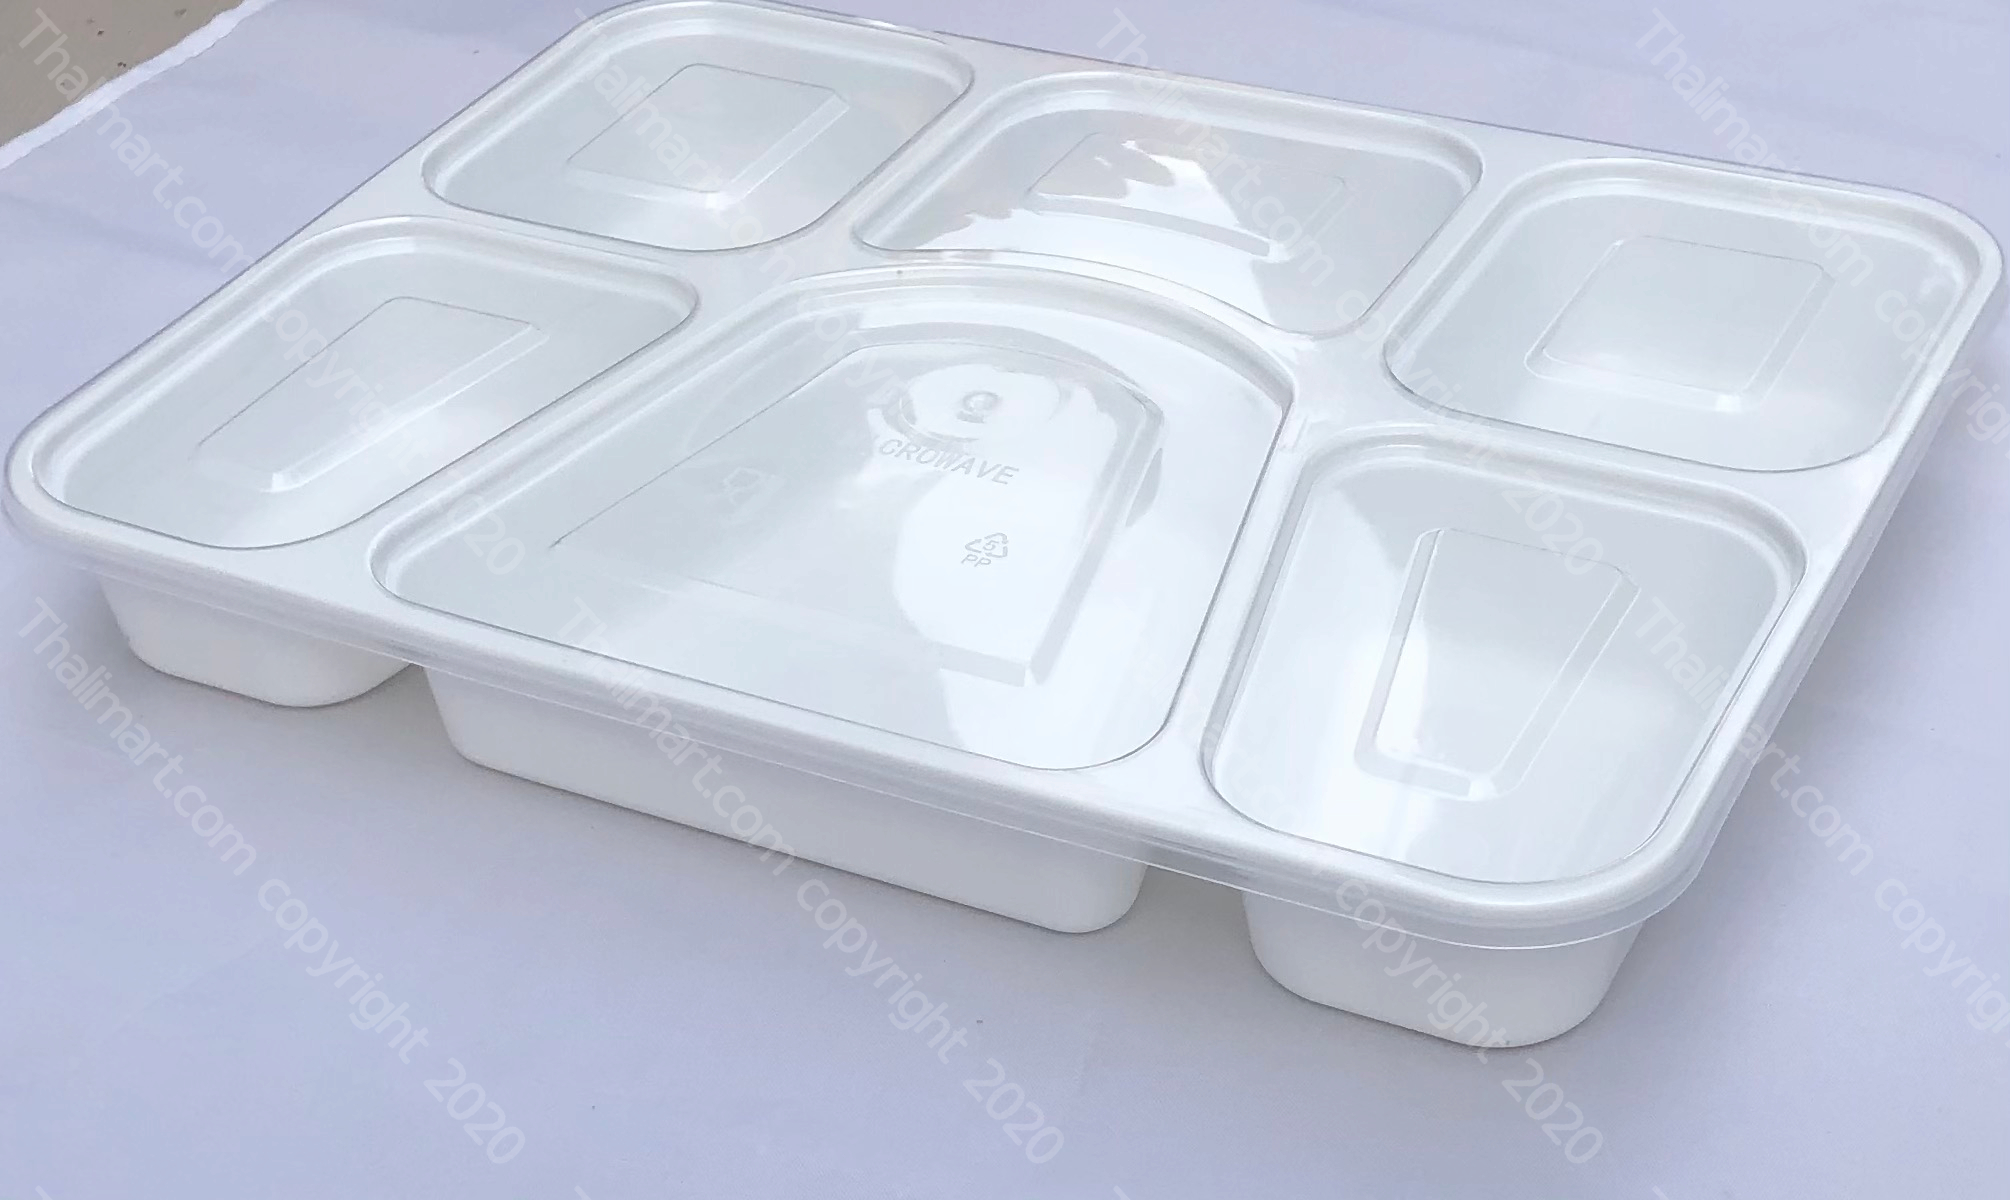 6 Compartment Disposable Microwave Safe White Thali / Tray w/ Lid